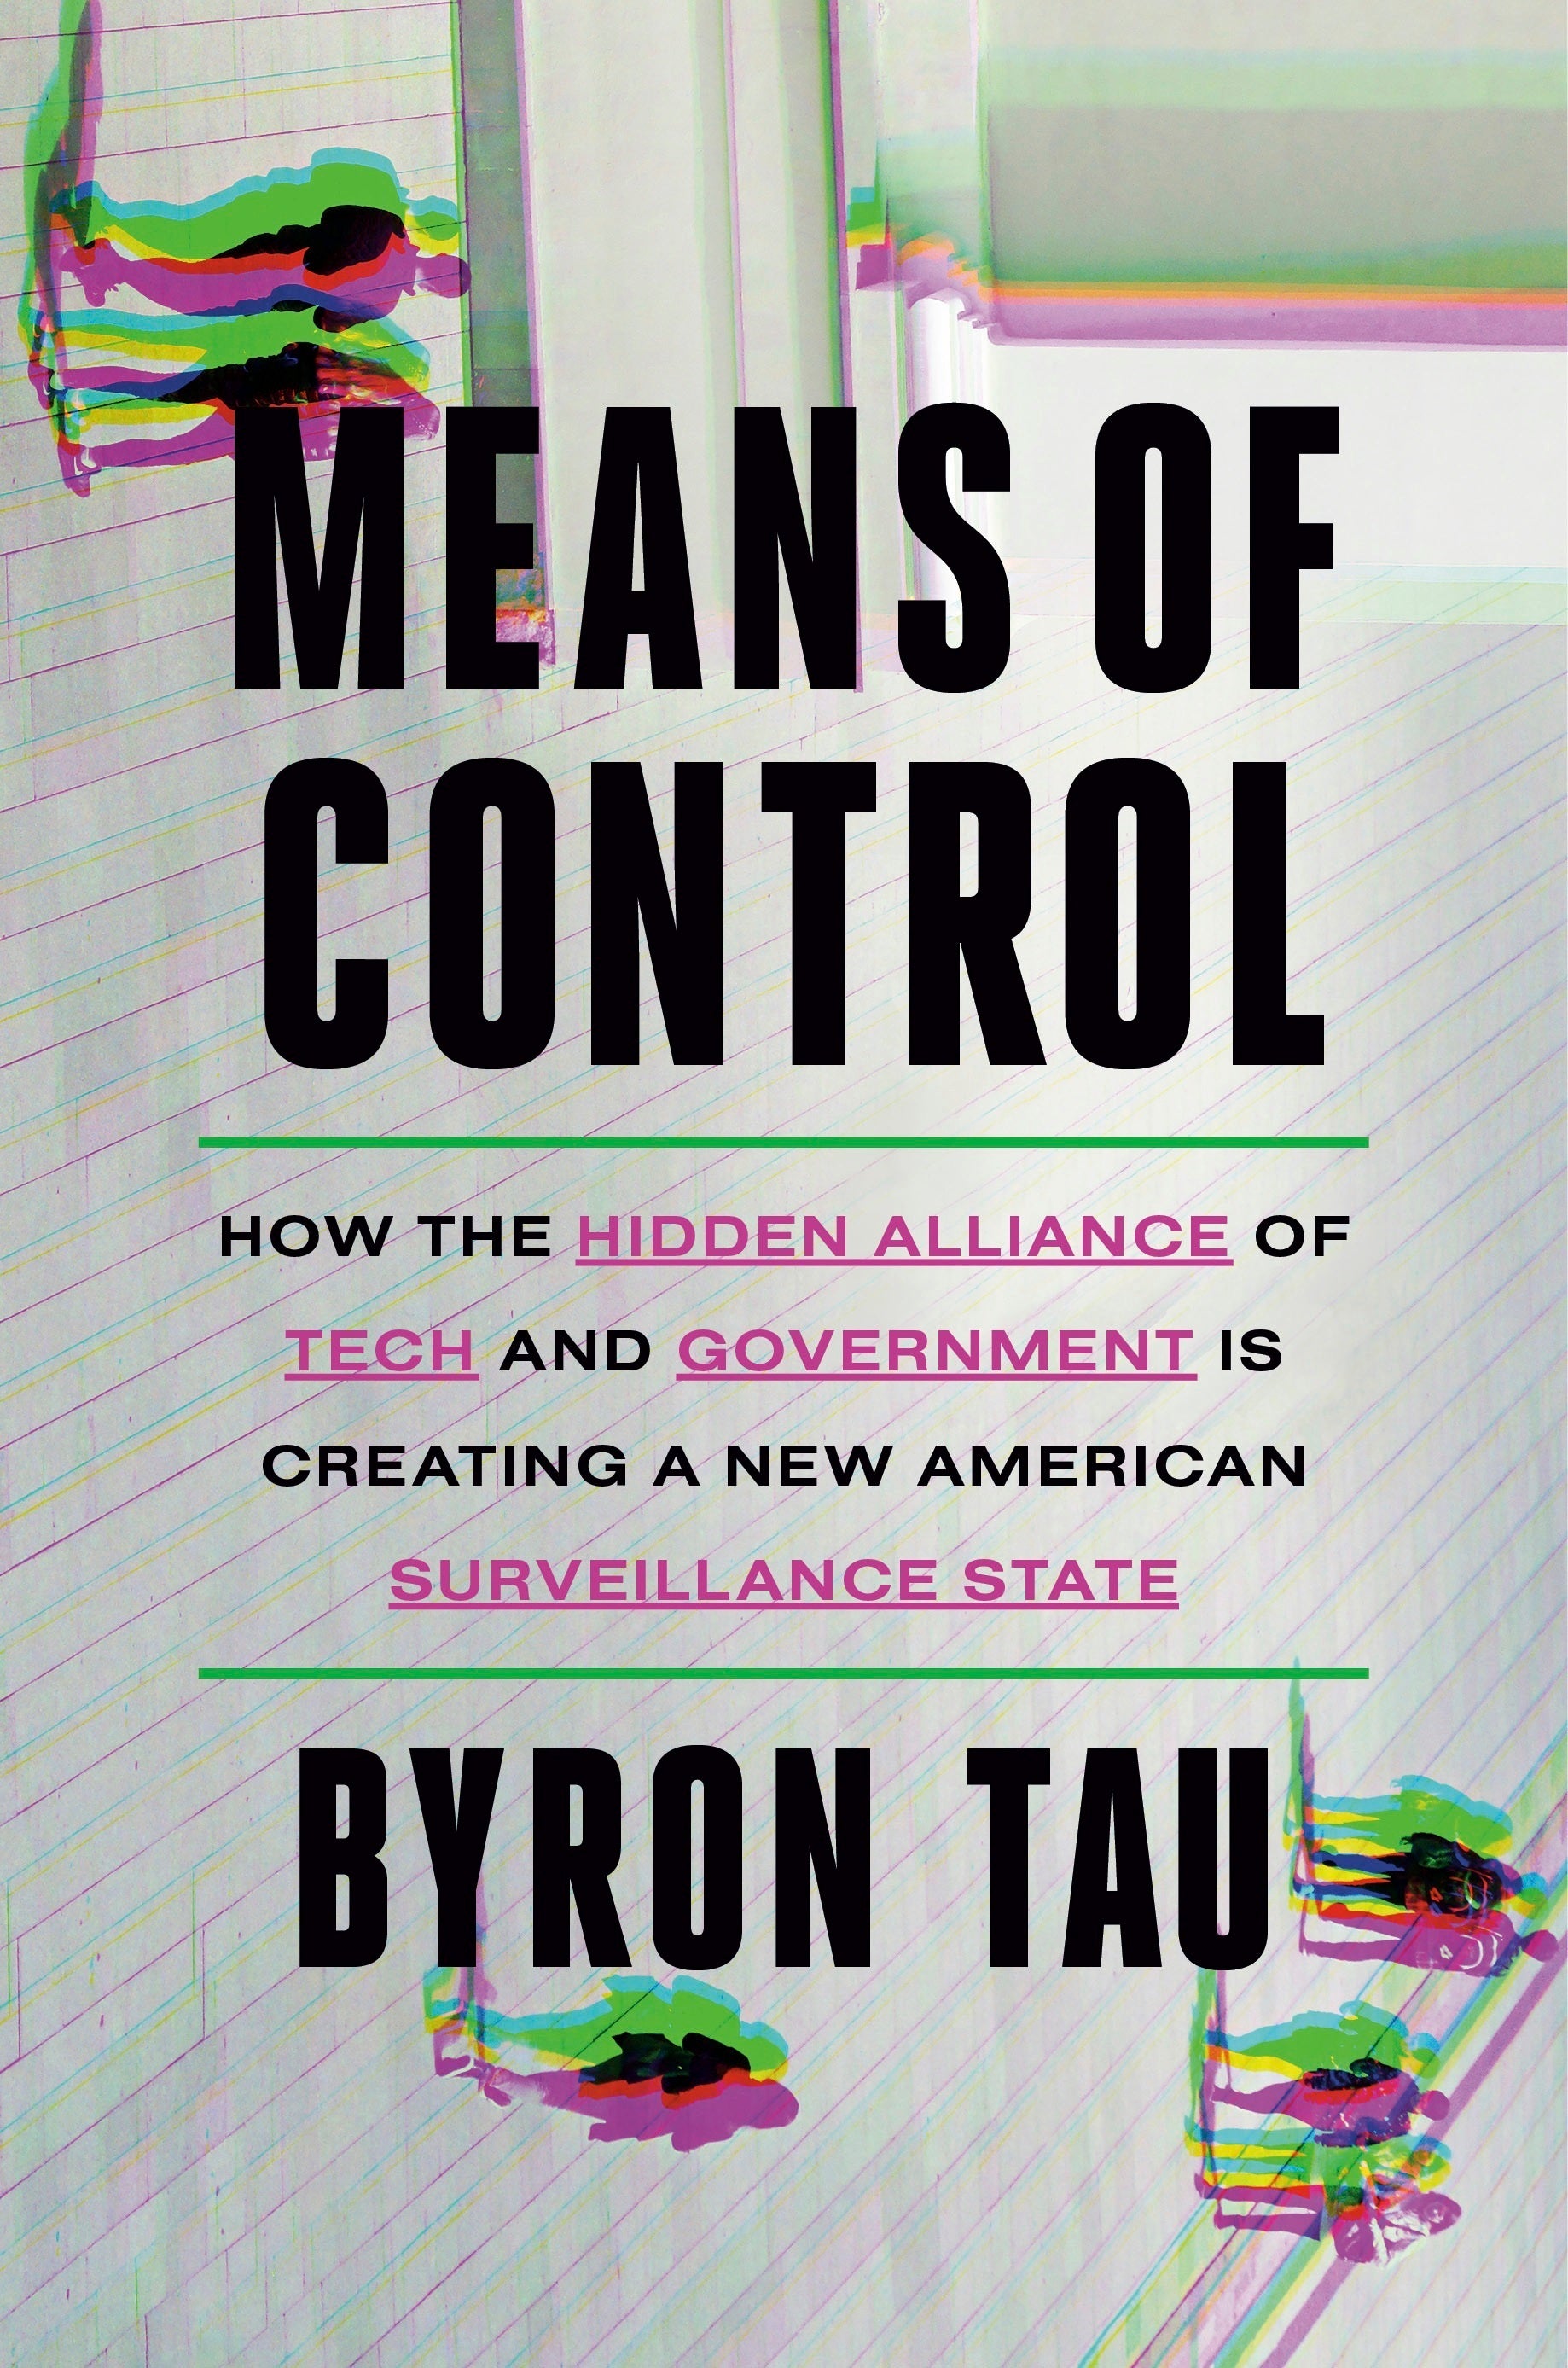 Book Review - Means of Control